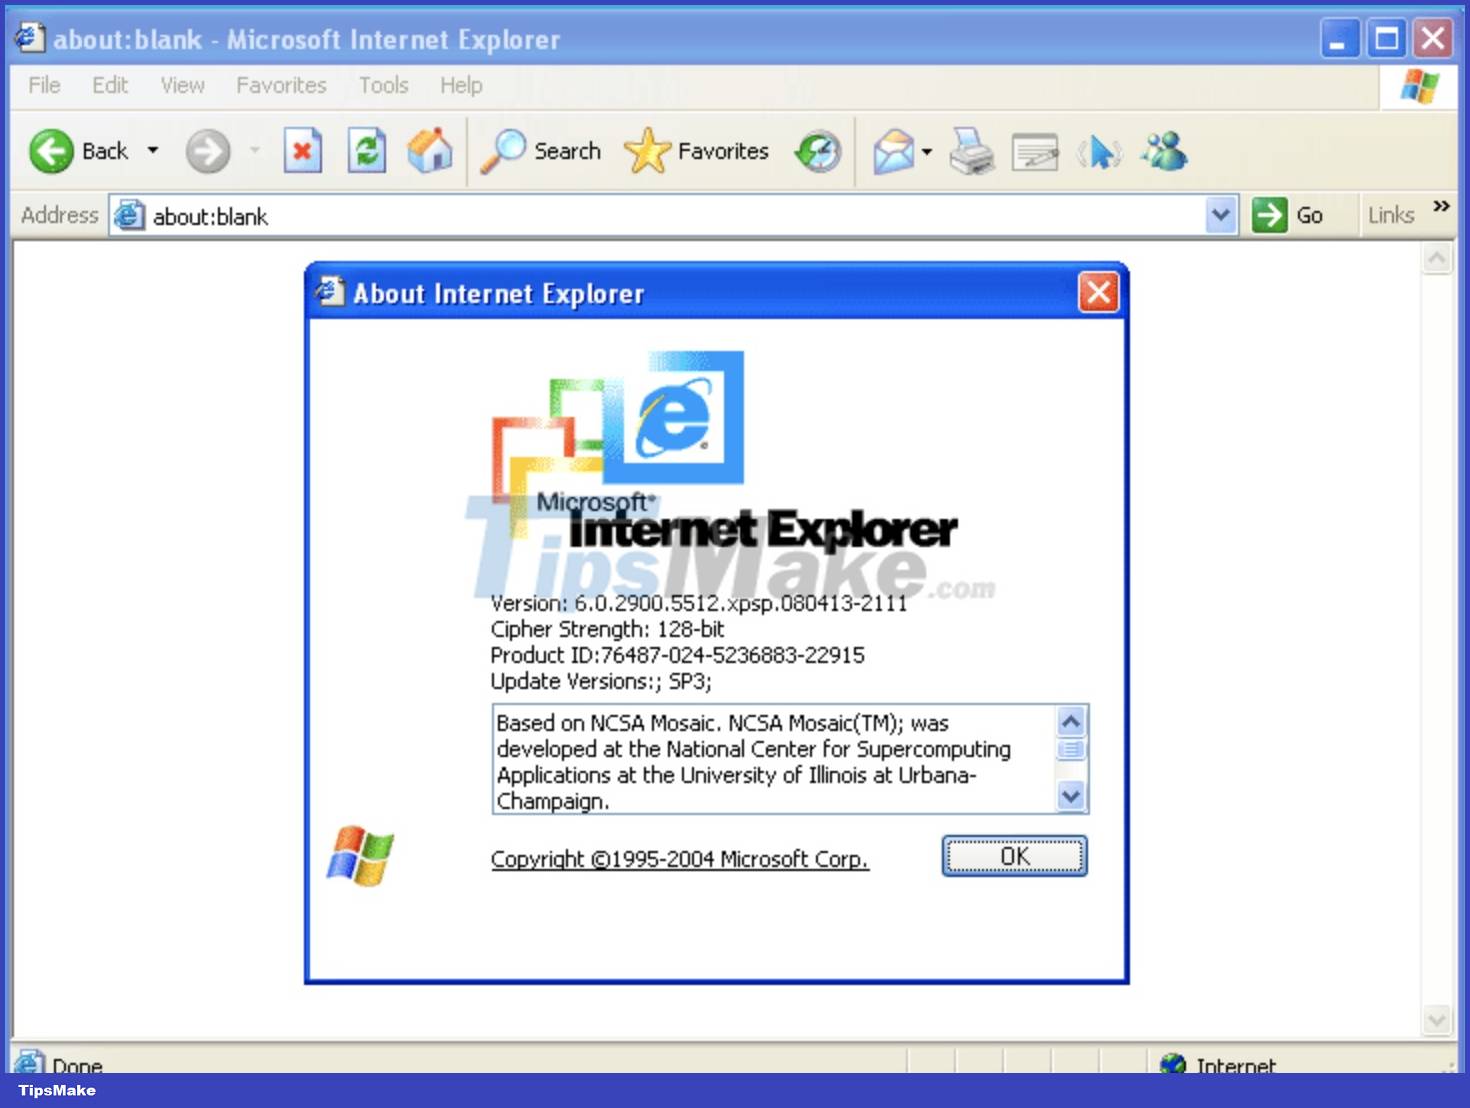 looking-back-at-the-life-full-of-ups-and-downs-of-internet-explorer-picture-7-PCgZMjtP3.jpg